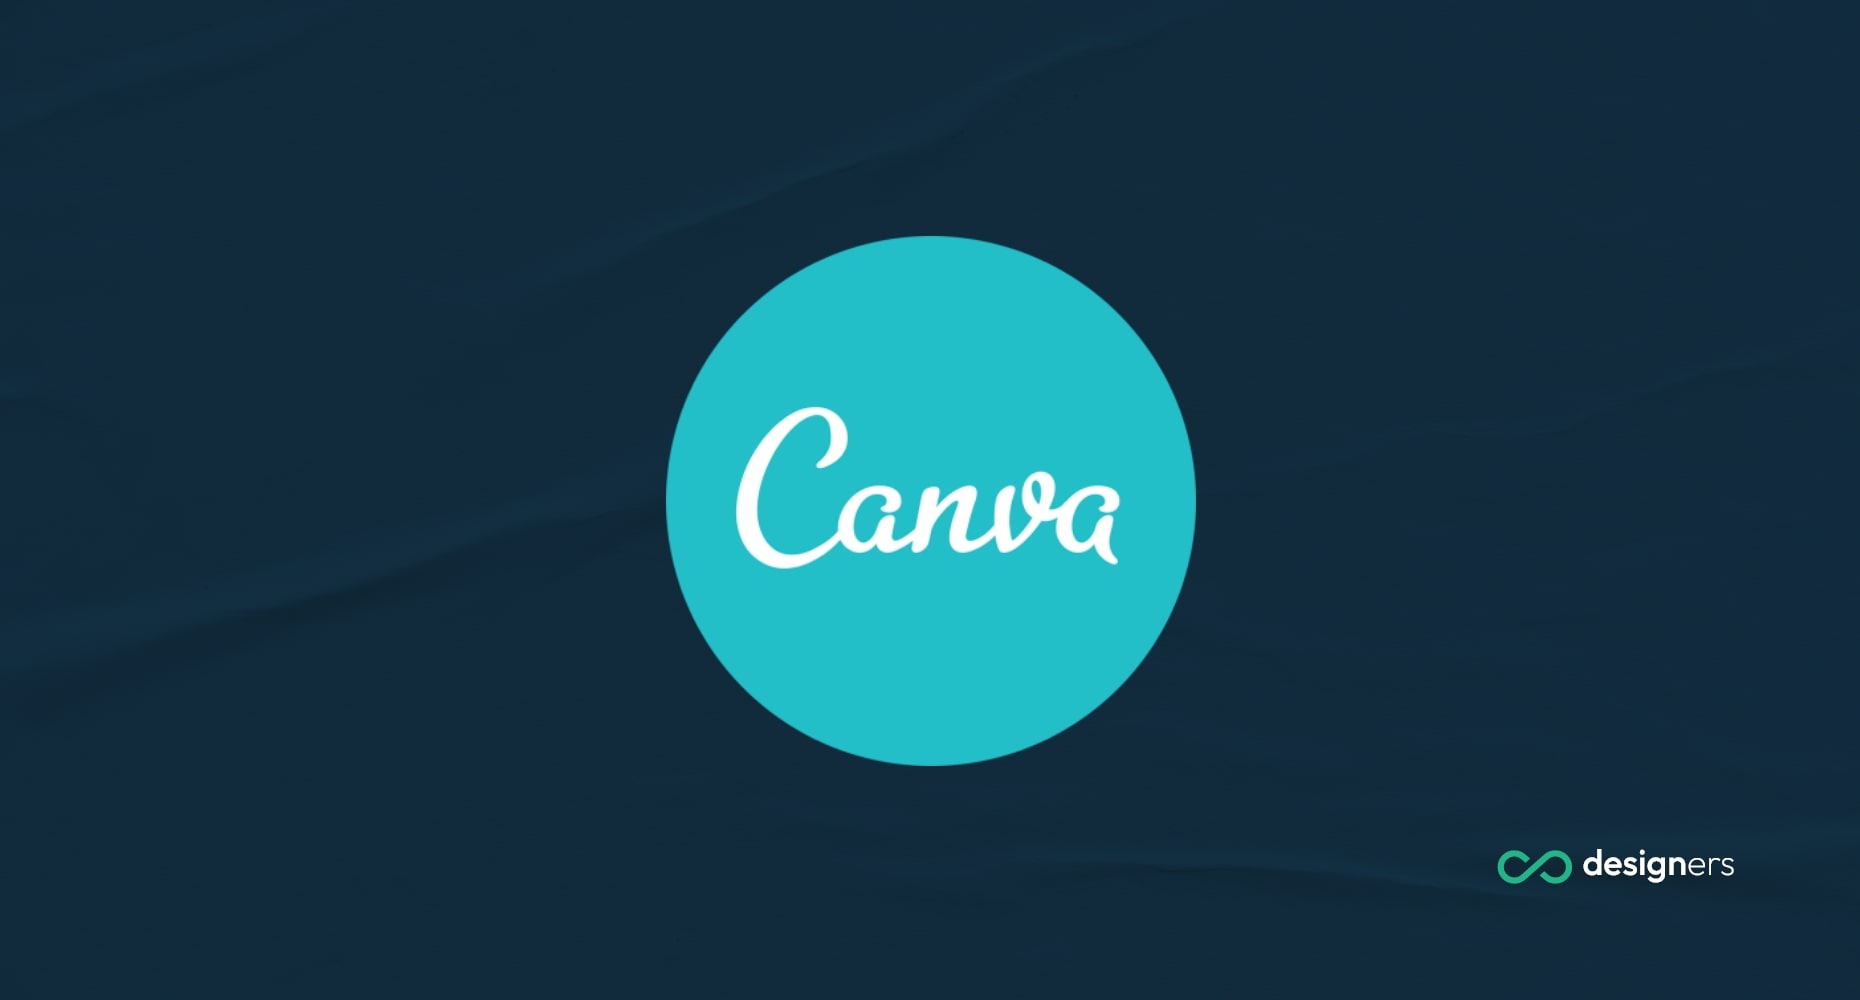 Where is the paint brush in Canva?